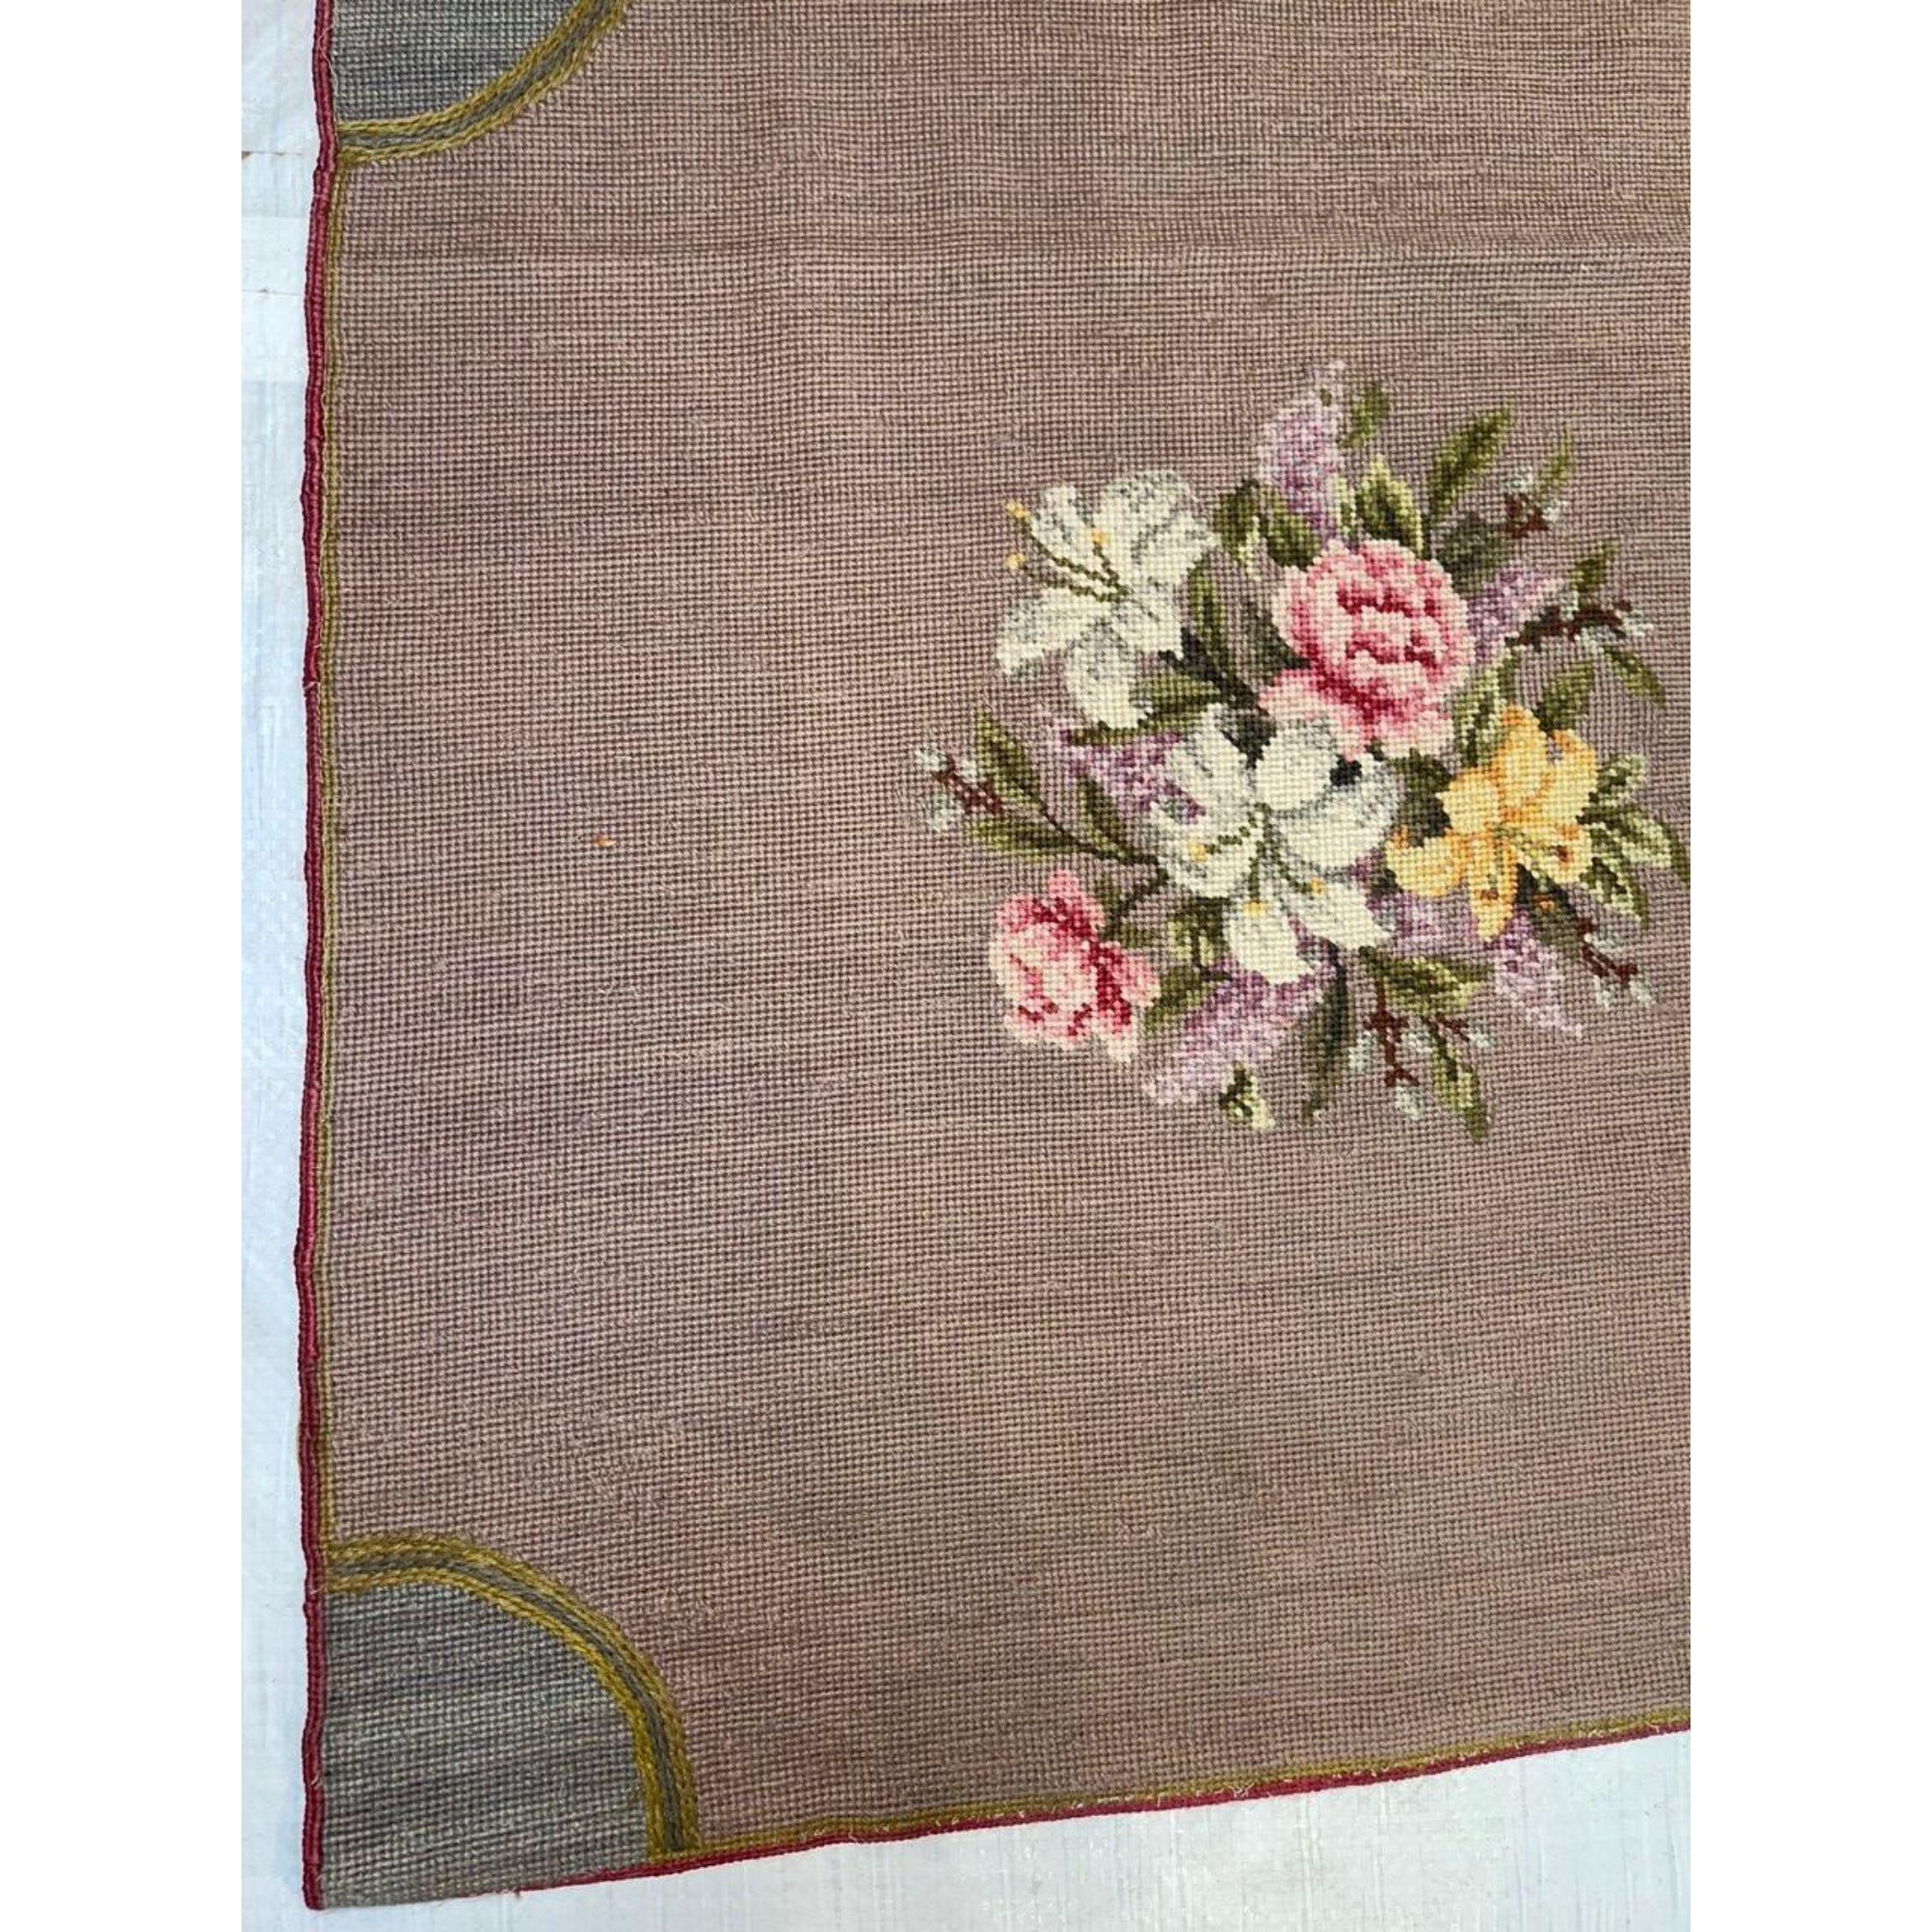 Other 1920s Antique Needlepoint Rug - 6'7'' X 6'5'' For Sale